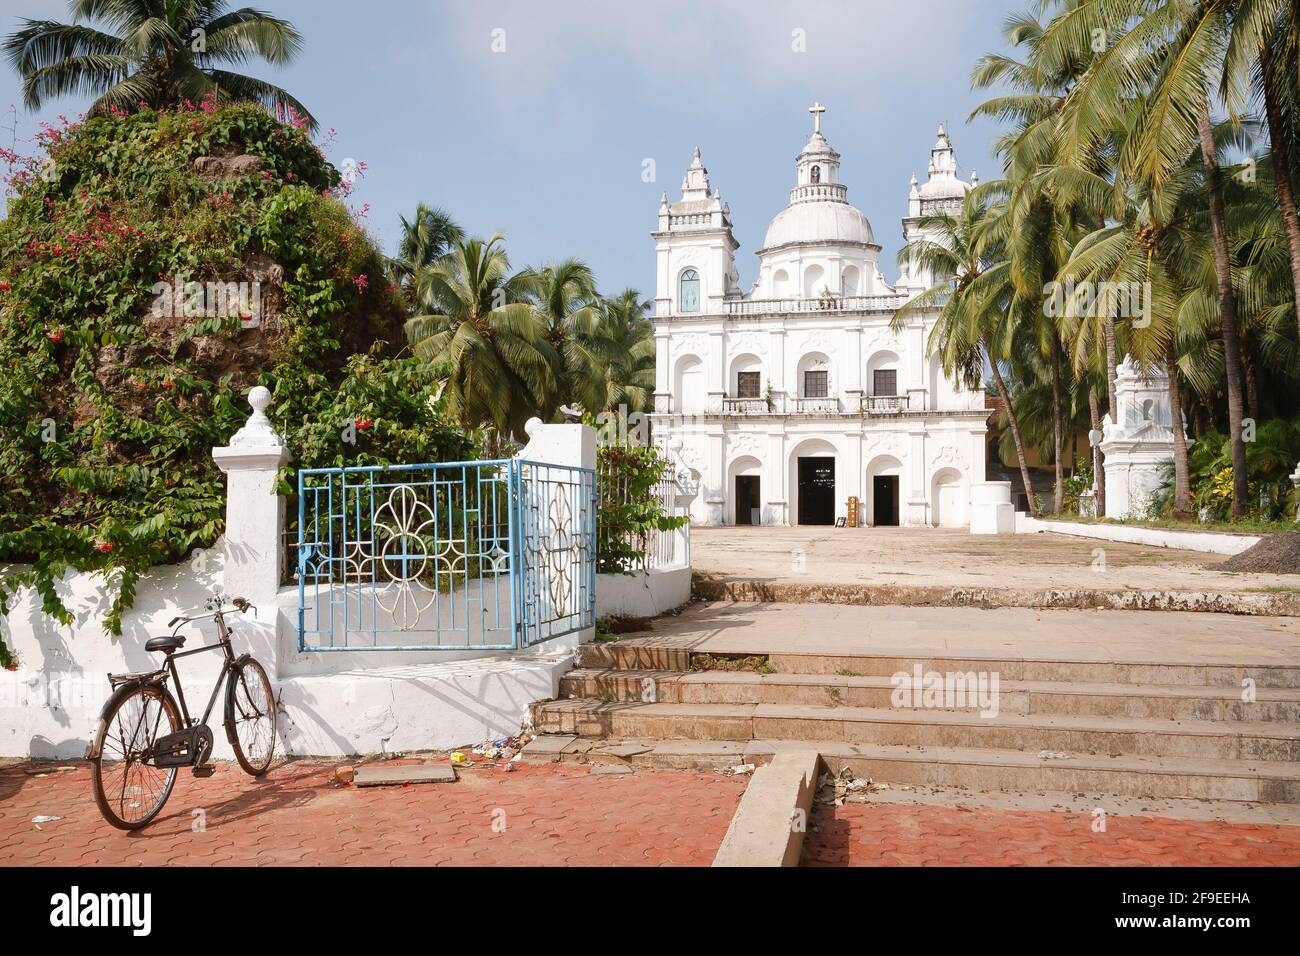 Bicycle outside the Church of St Alex, a large Catholic Christian church in Calangute, North Goa, India Stock Photo